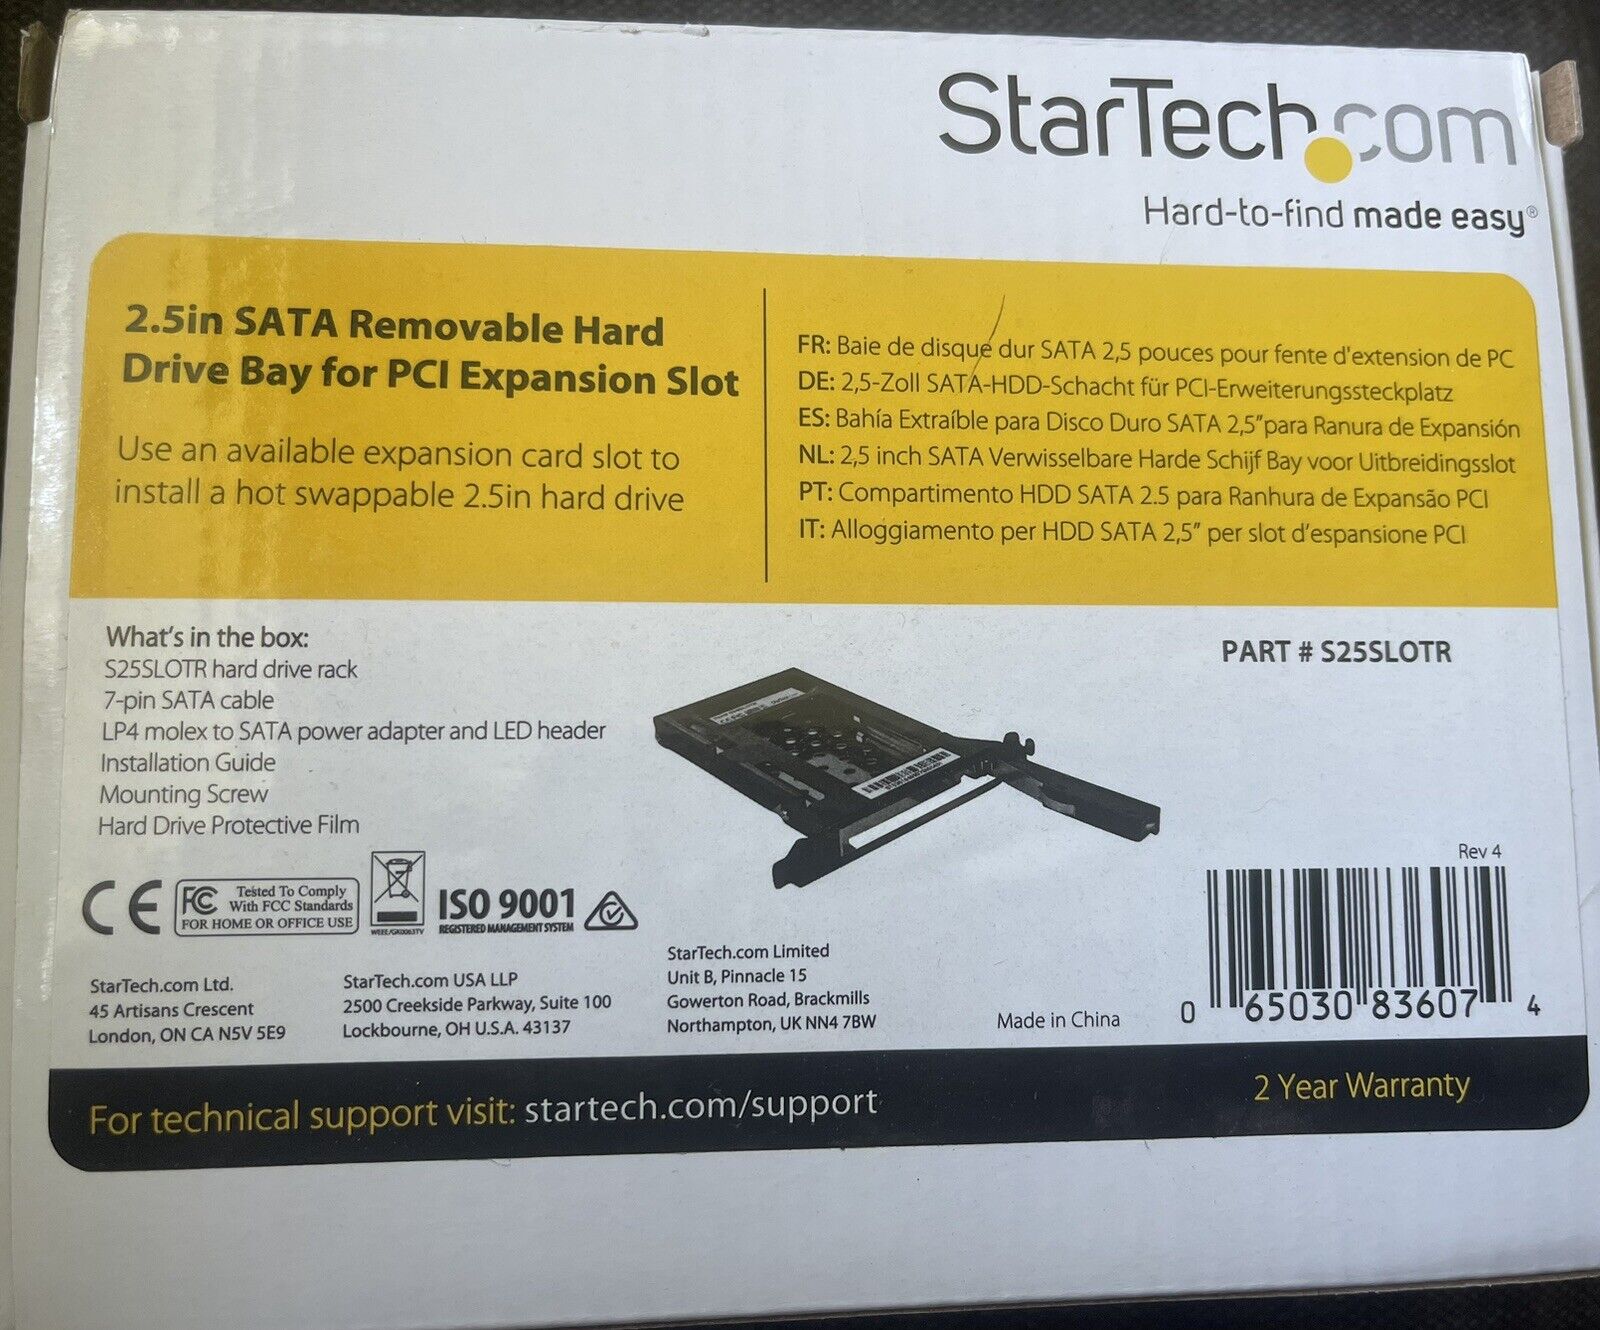 StarTech S25SLOTR 2.5in SATA Removable Hard Drive Bay for PCI Expansion Slot